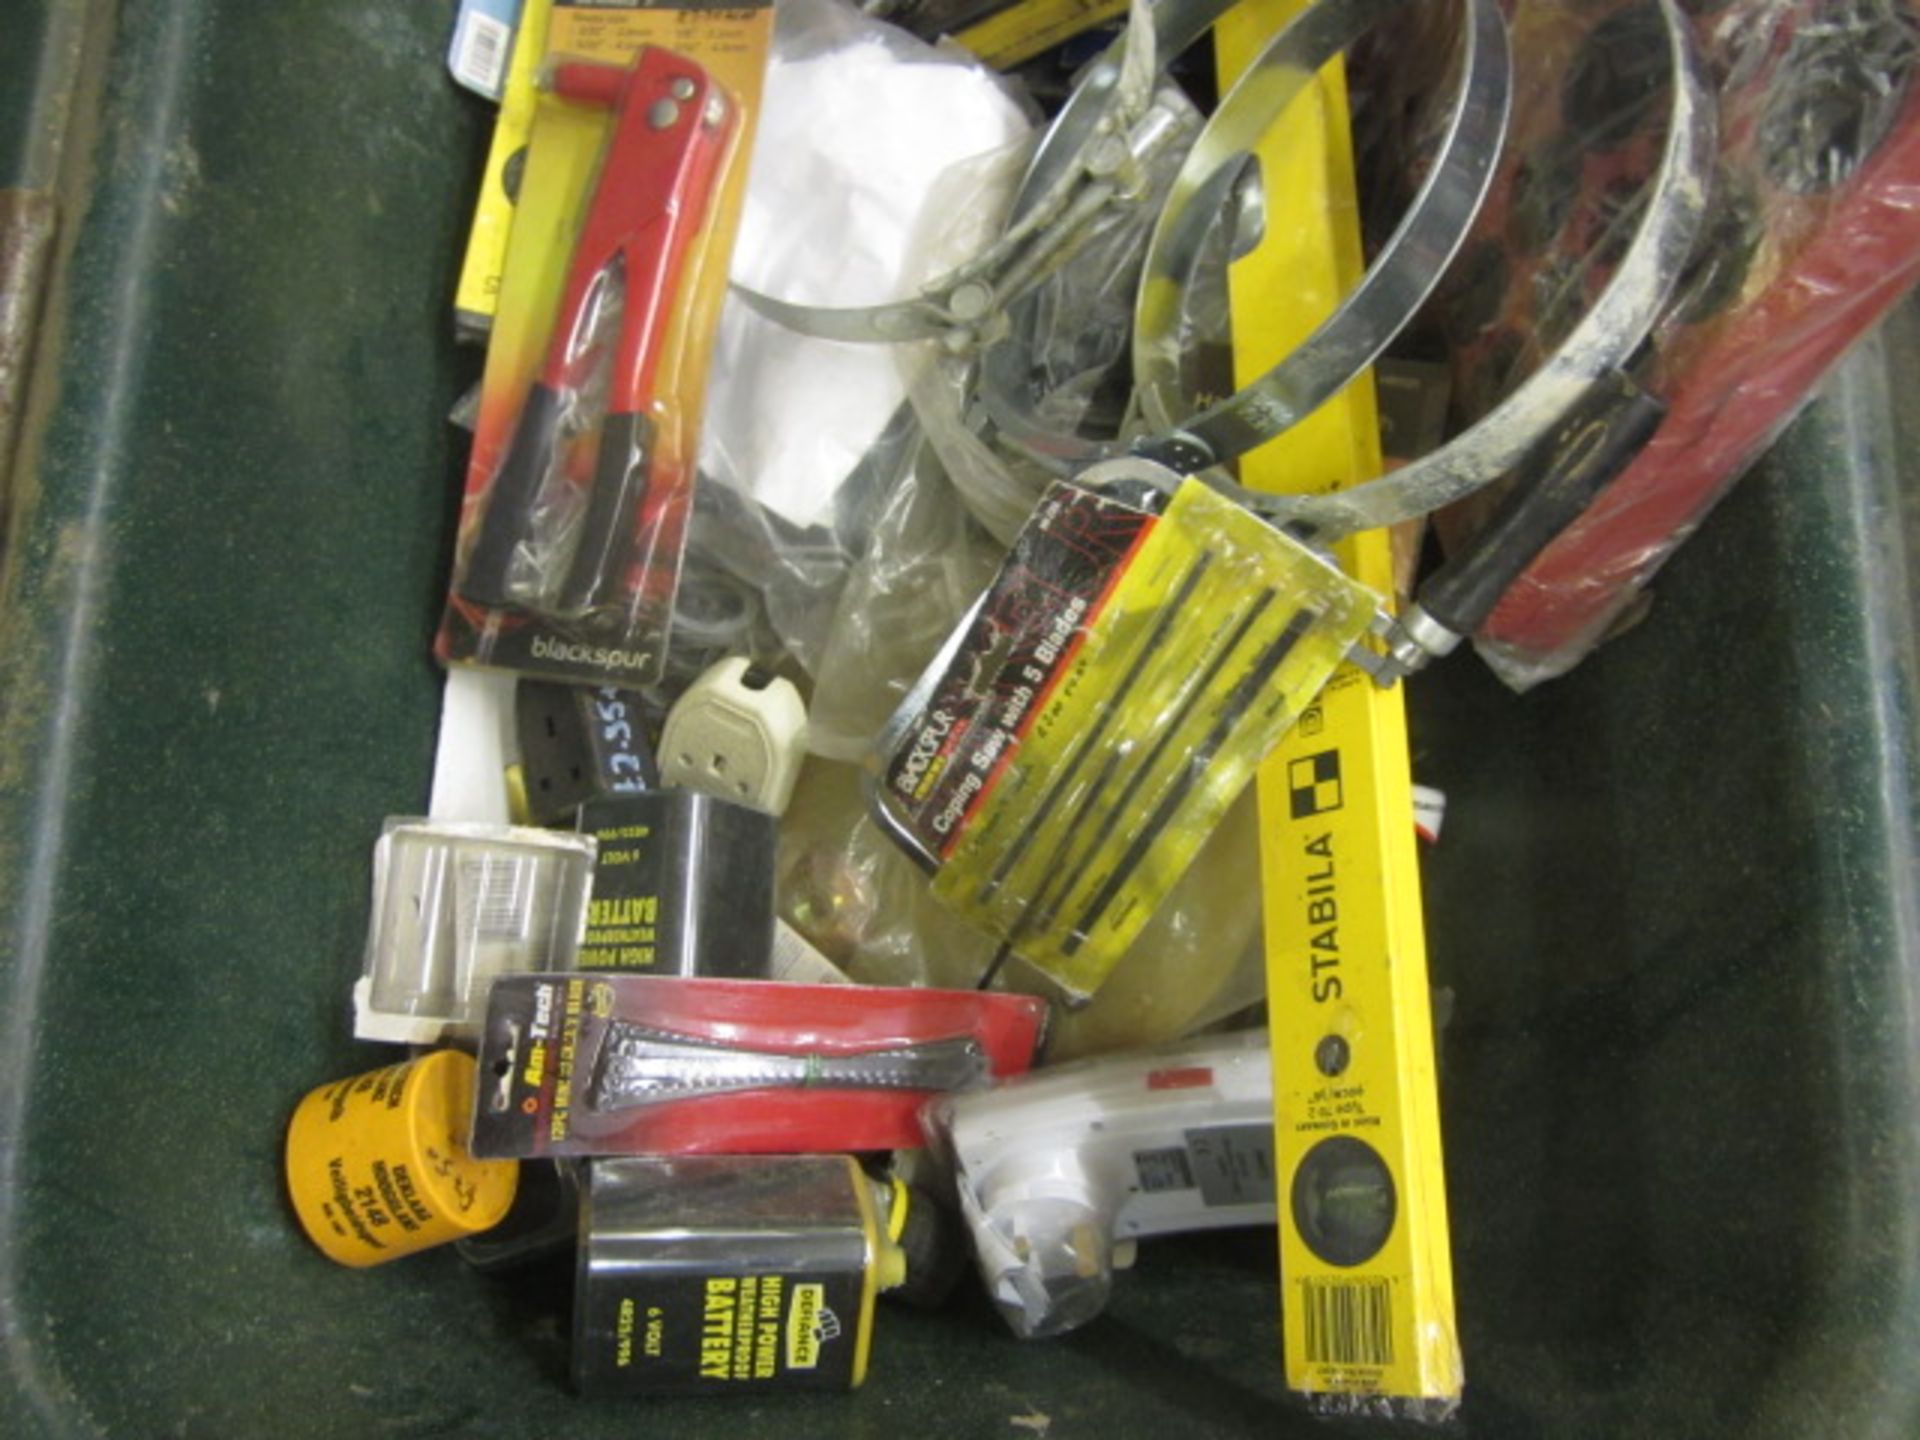 Miscellaneous lot including 'O' rings, spirit level, screwdrivers, 6v batteries, torch, head - Image 3 of 3